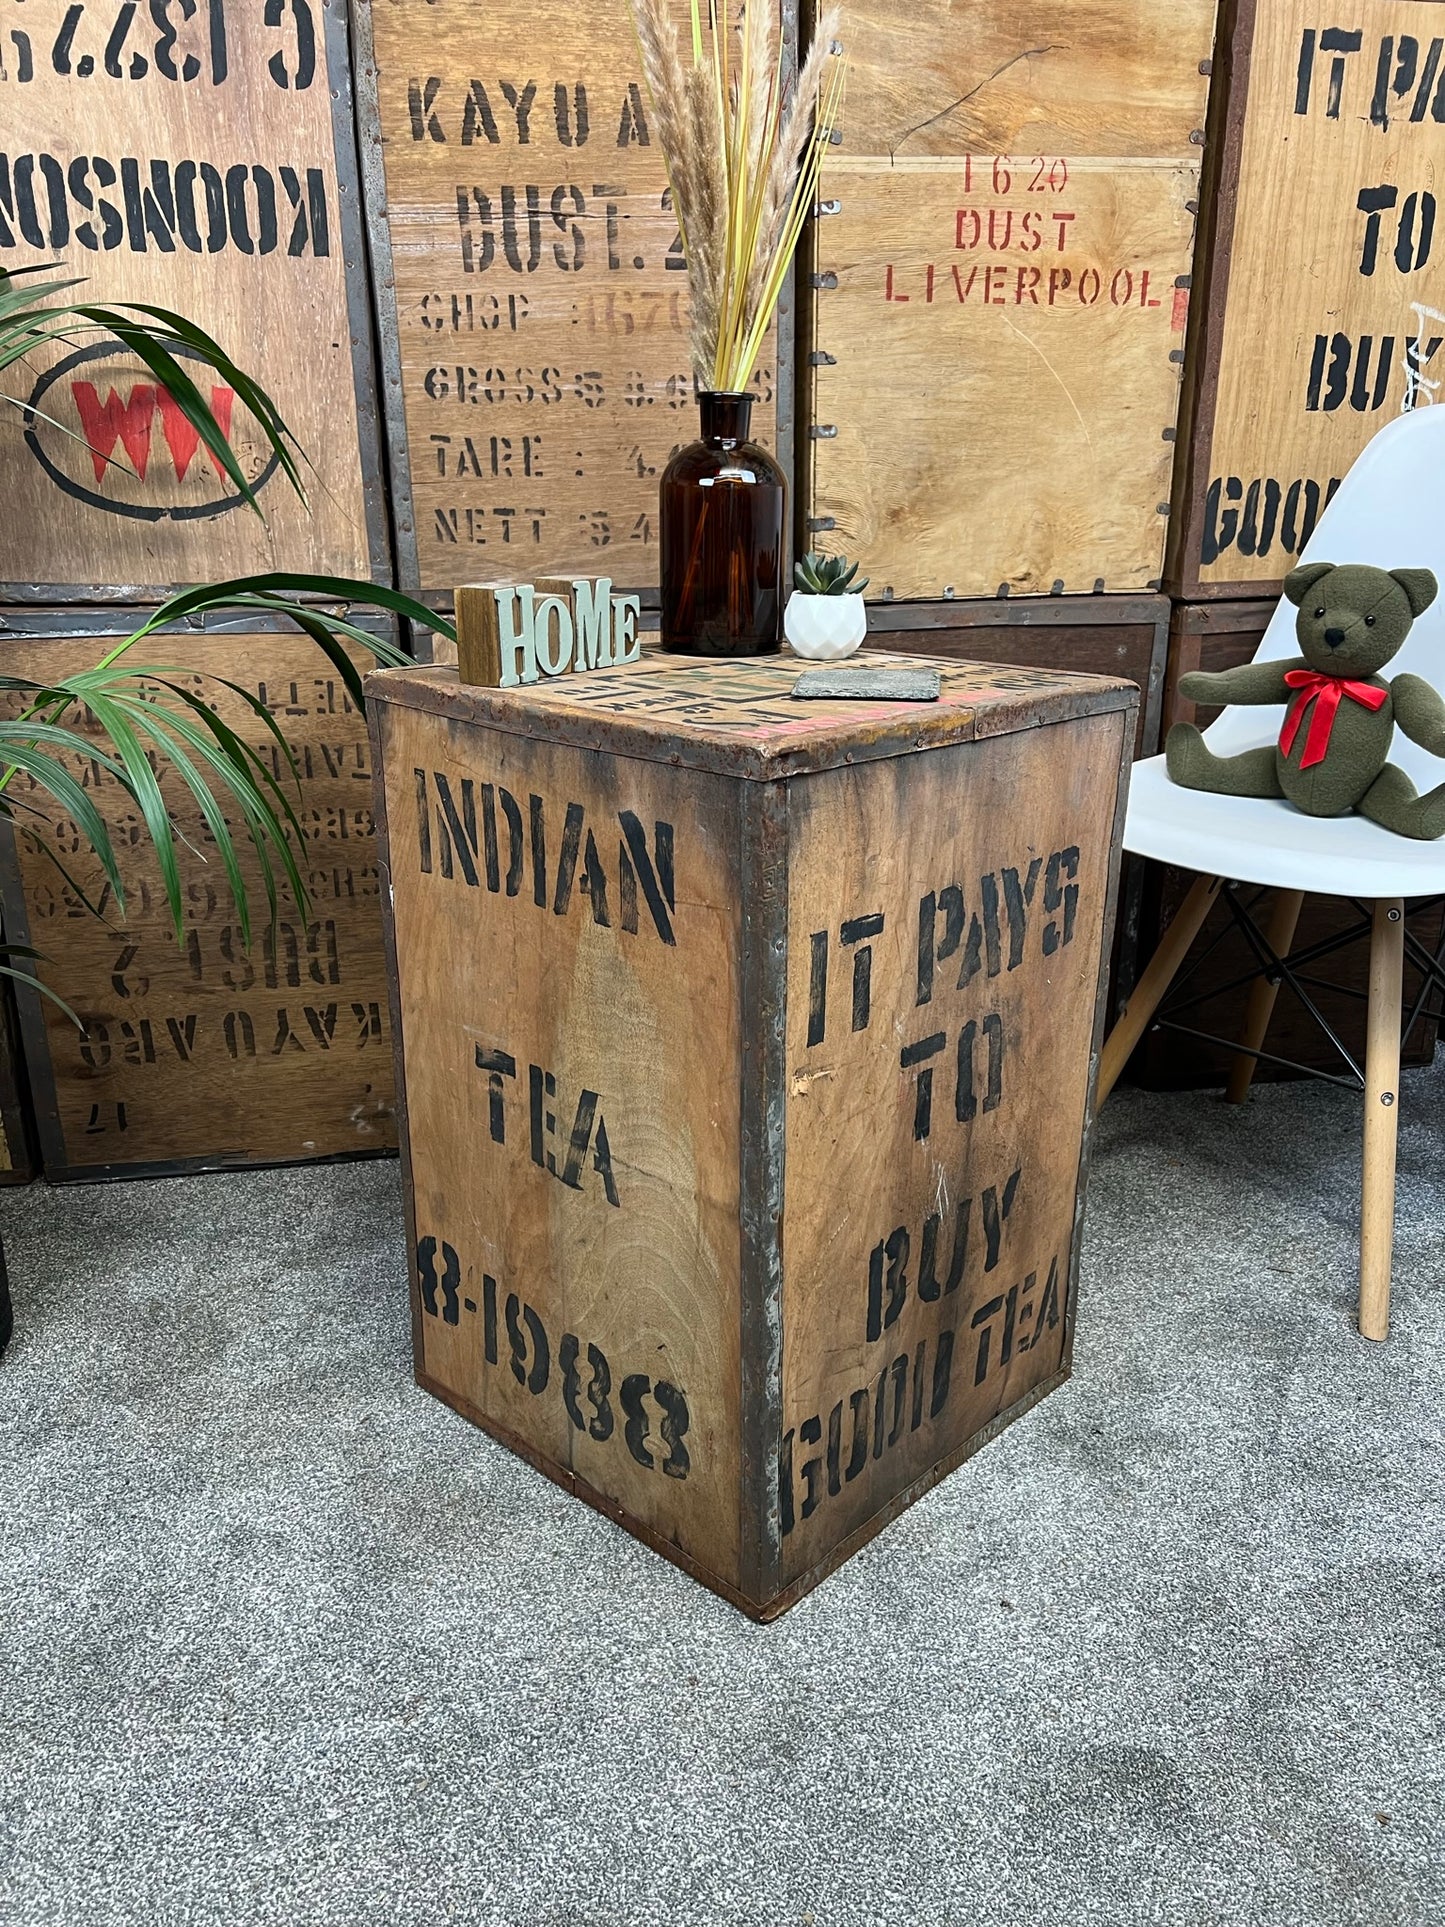 Vintage Tea Crate "It Pays To Buy Good Tea" Rustic Decor Chest Side Coffee Table Box